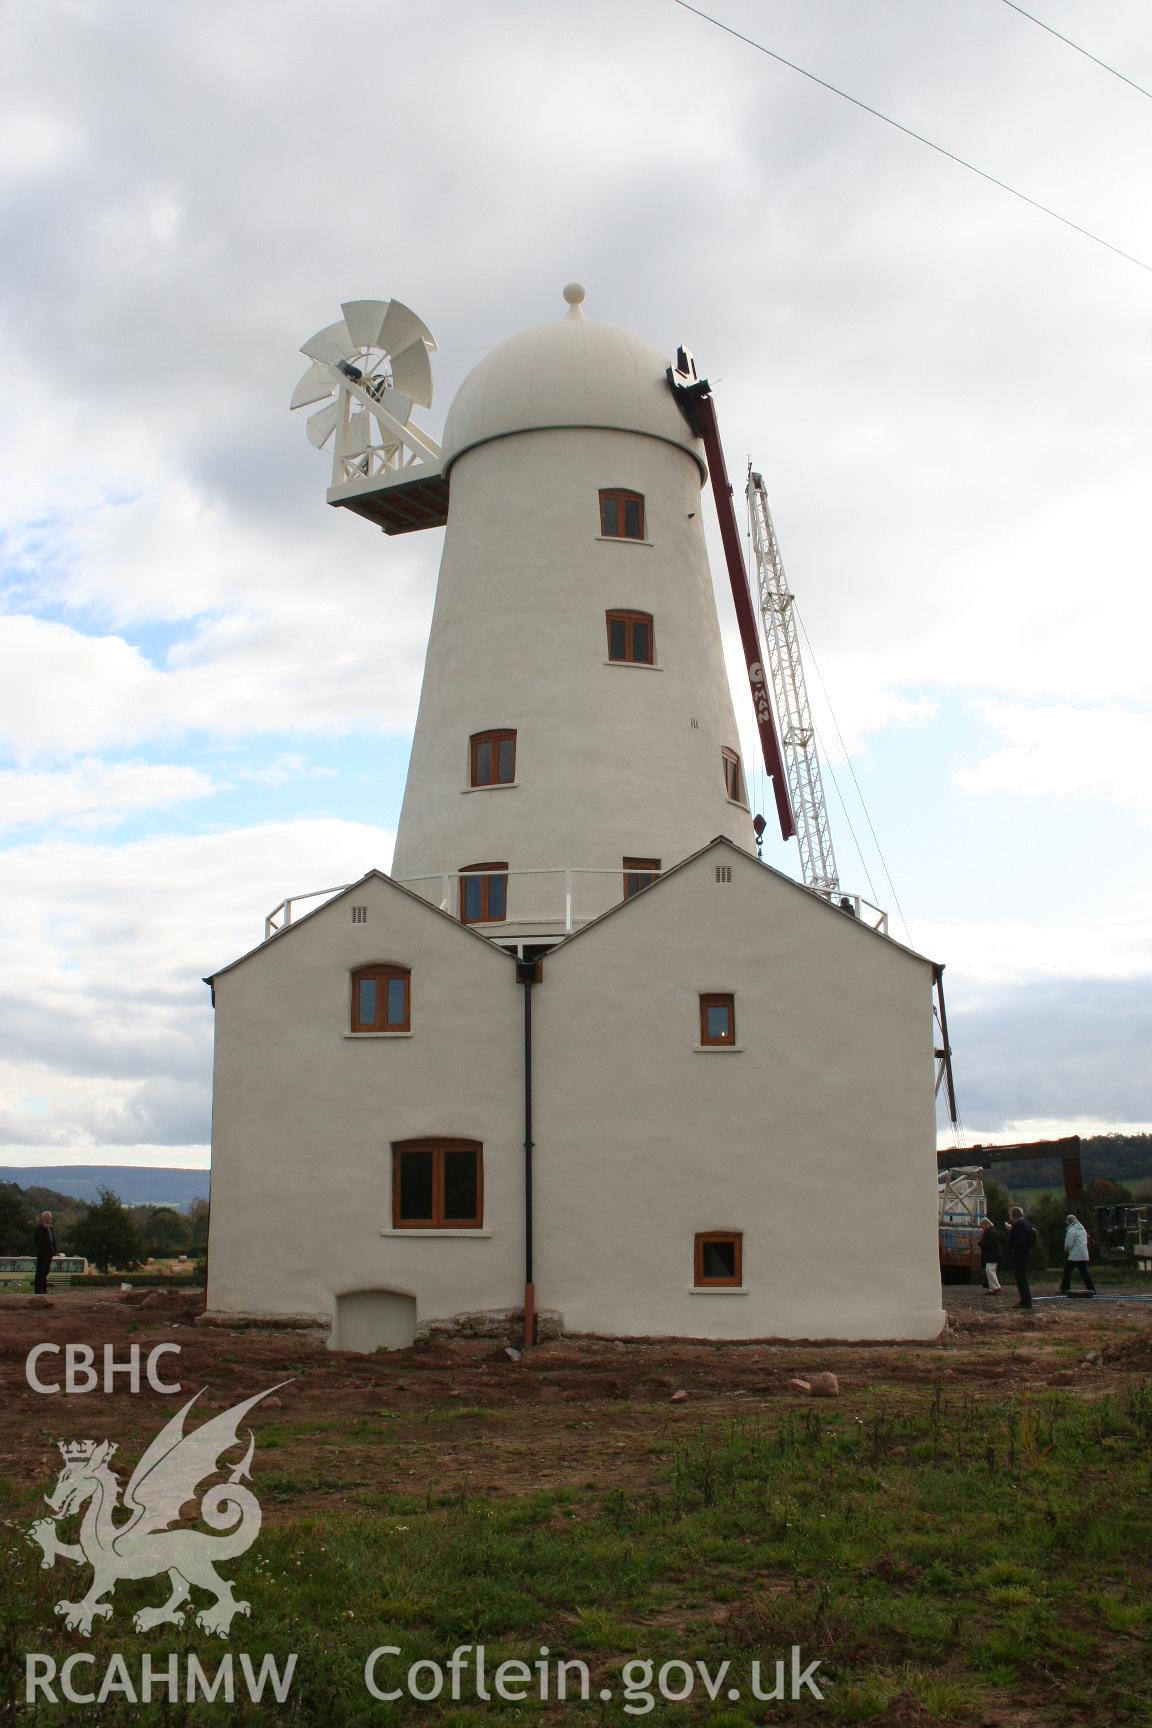 View of Llancayo Windmill from the north, taken by Brian Malaws on 18 October 2008.